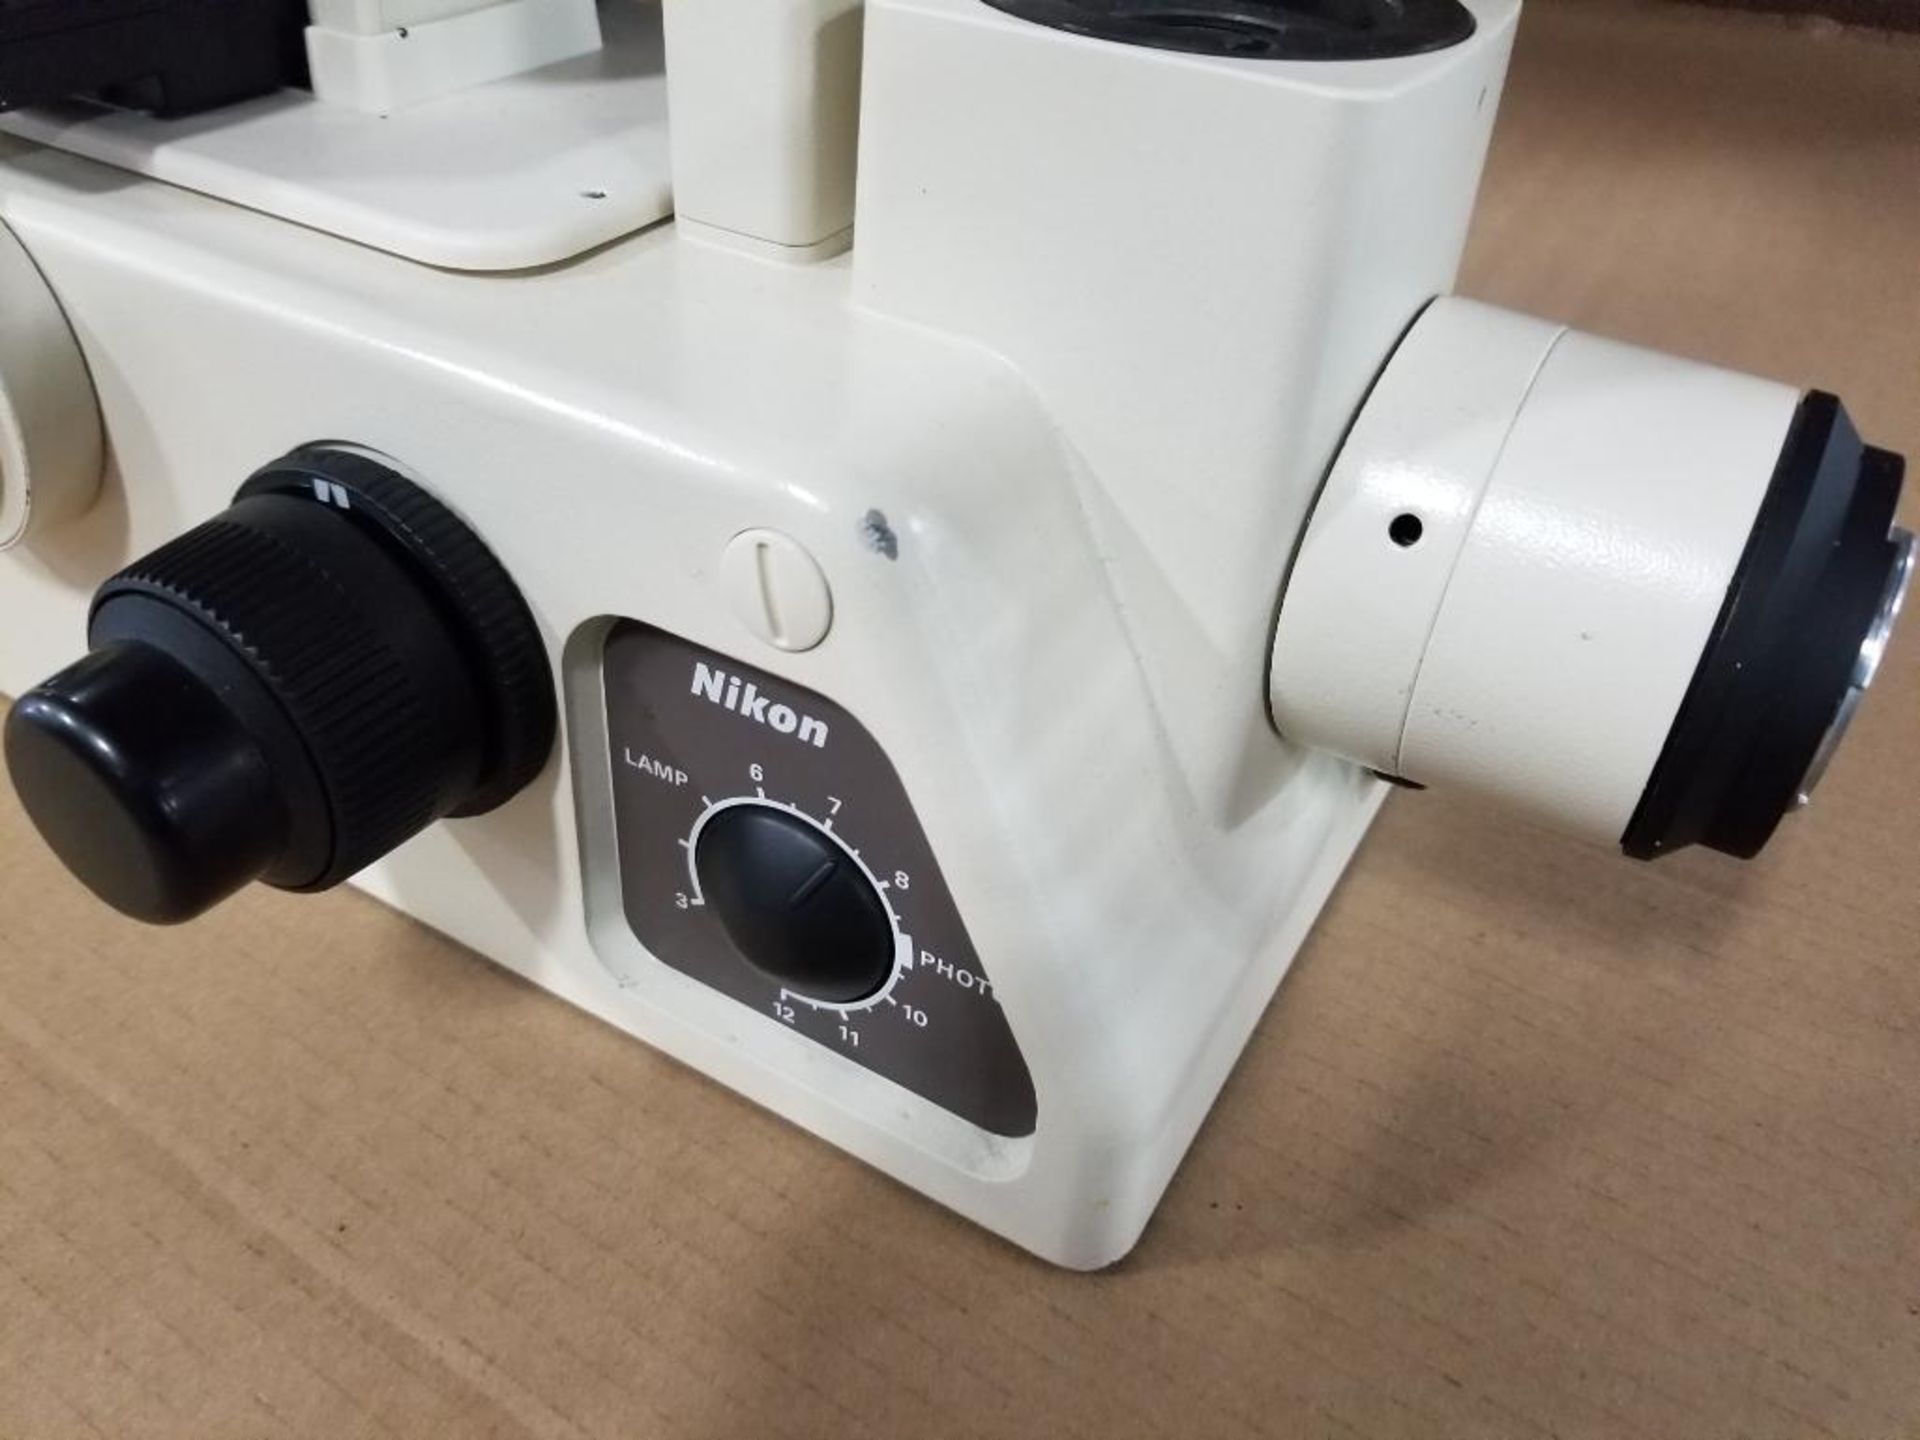 Nikon Diaphot 300 inverted fluorescent phase contrast microscope. S/N:310094 - Image 6 of 11